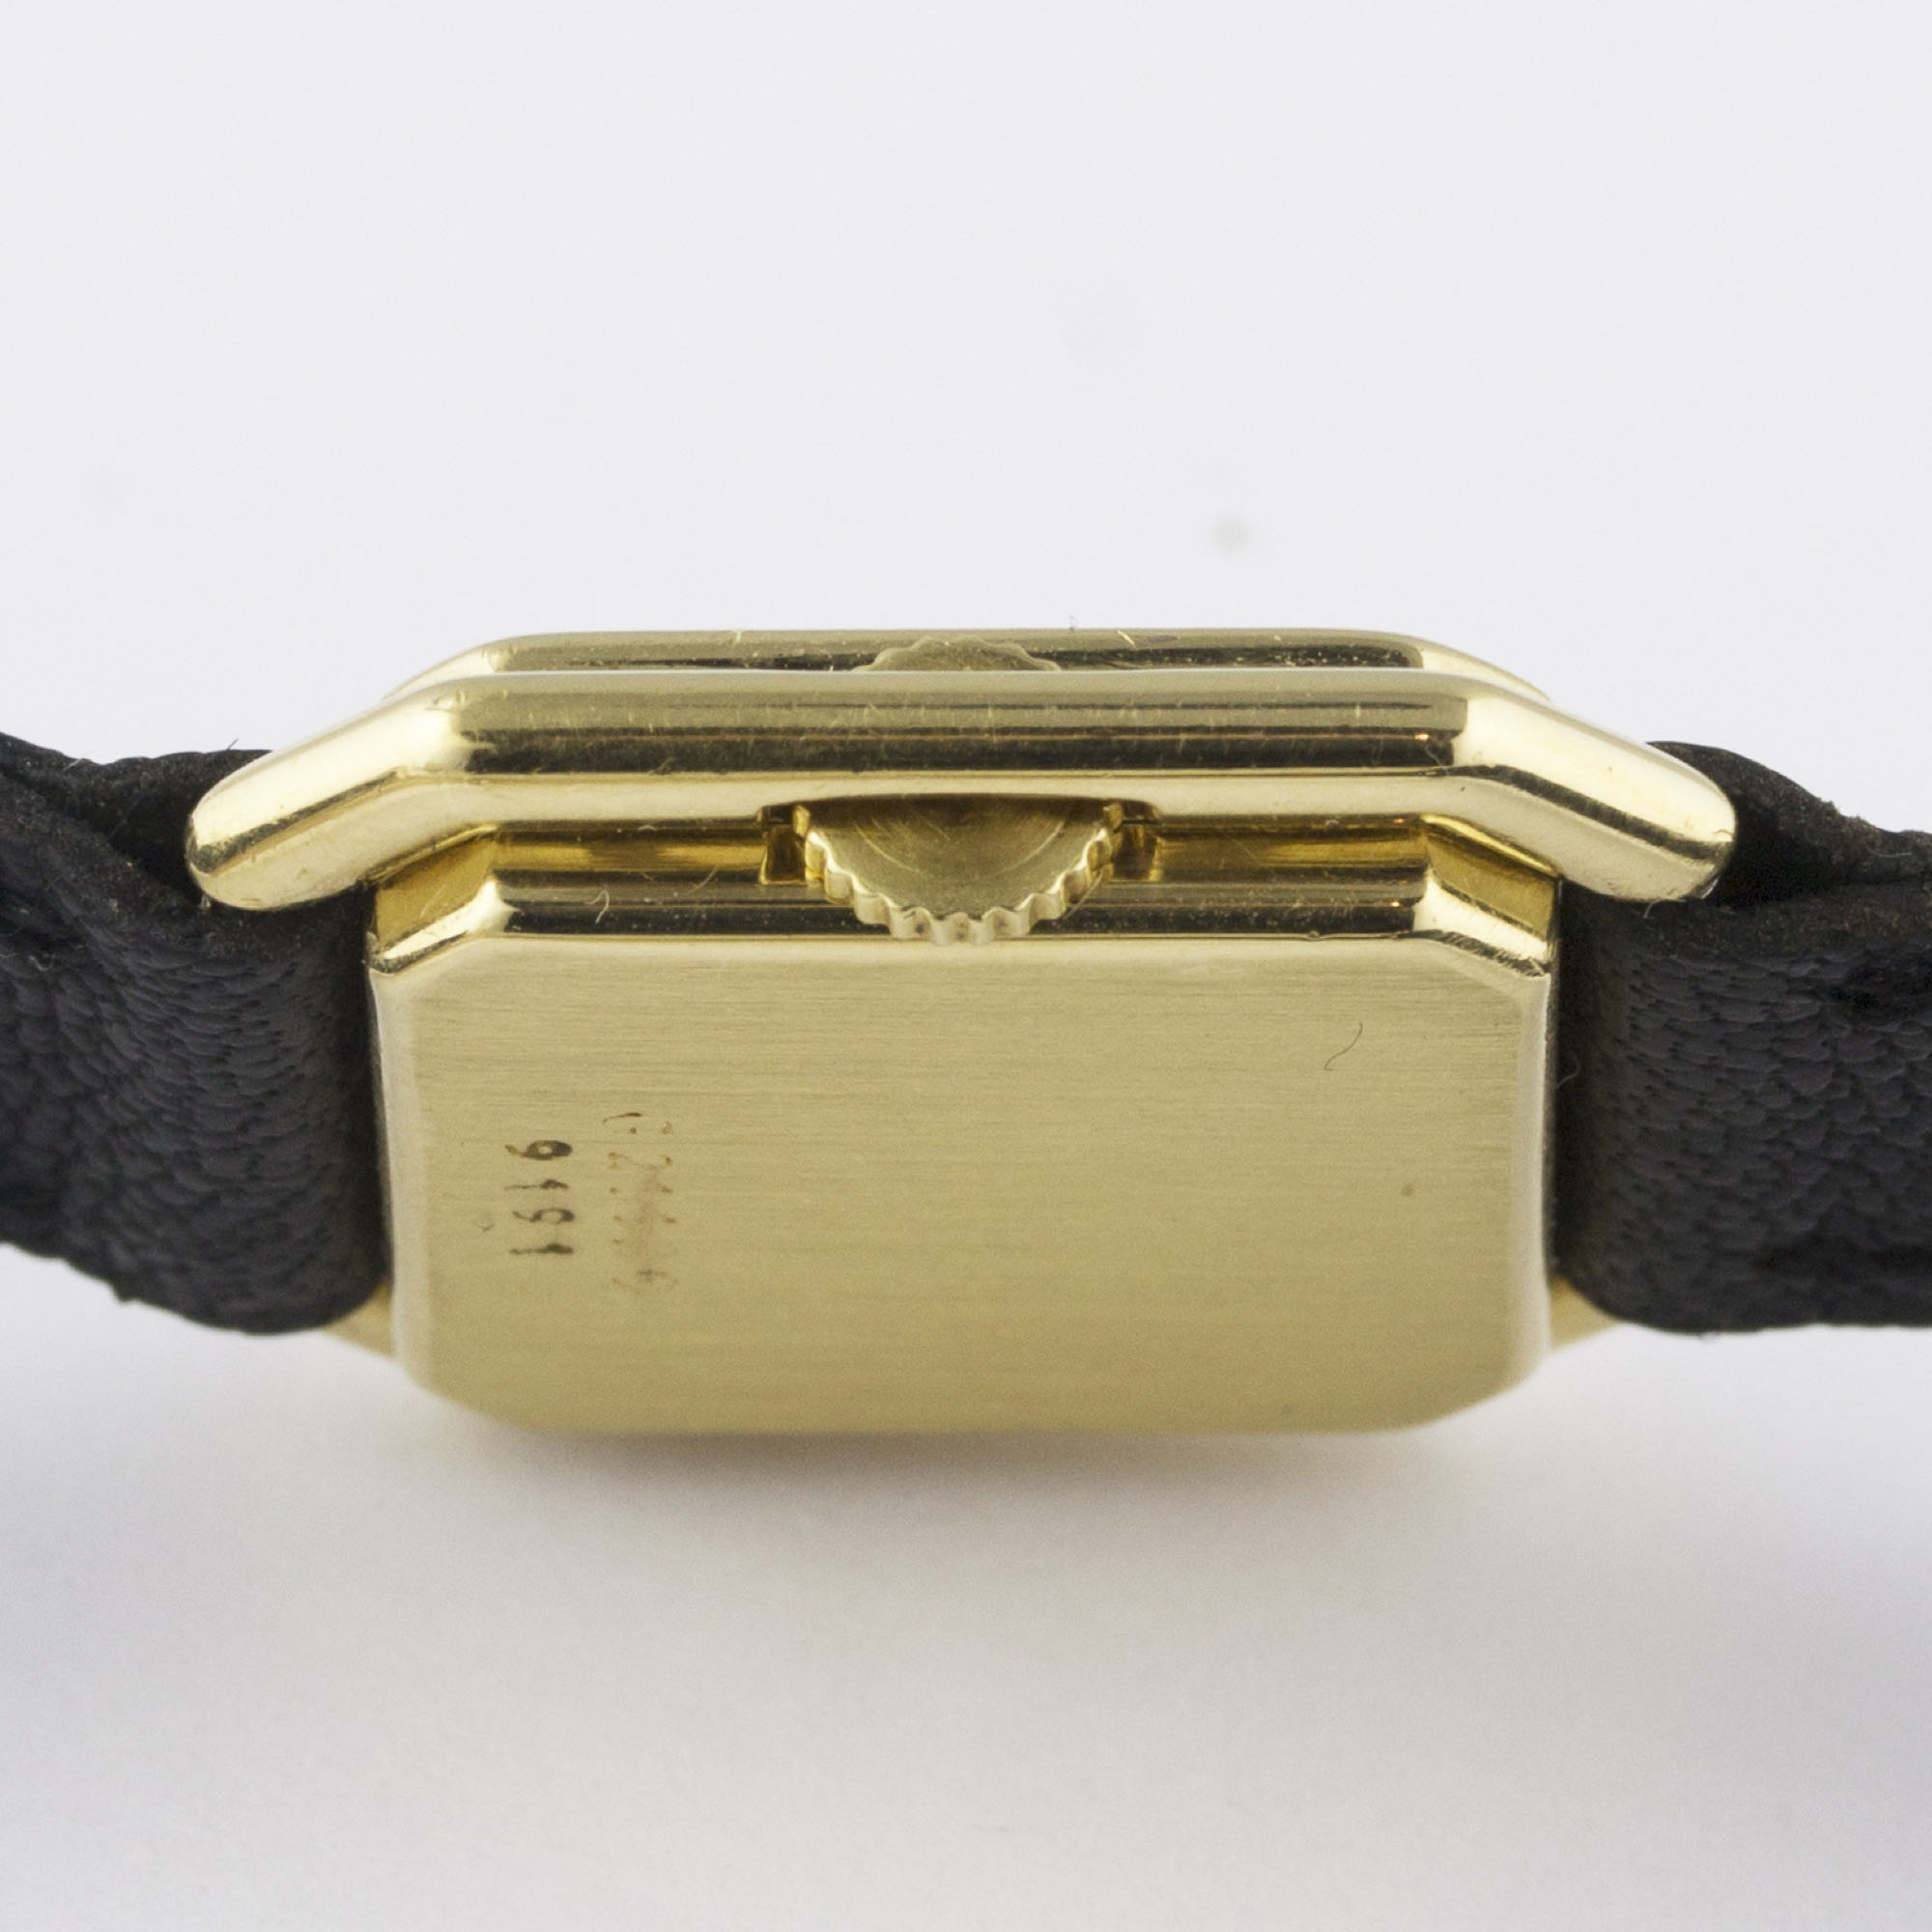 A RARE LADIES 18K SOLID GOLD CARTIER LONDON CEINTURE WRIST WATCH CIRCA 1969, WITH LONDON HALLMARKS - Image 10 of 11